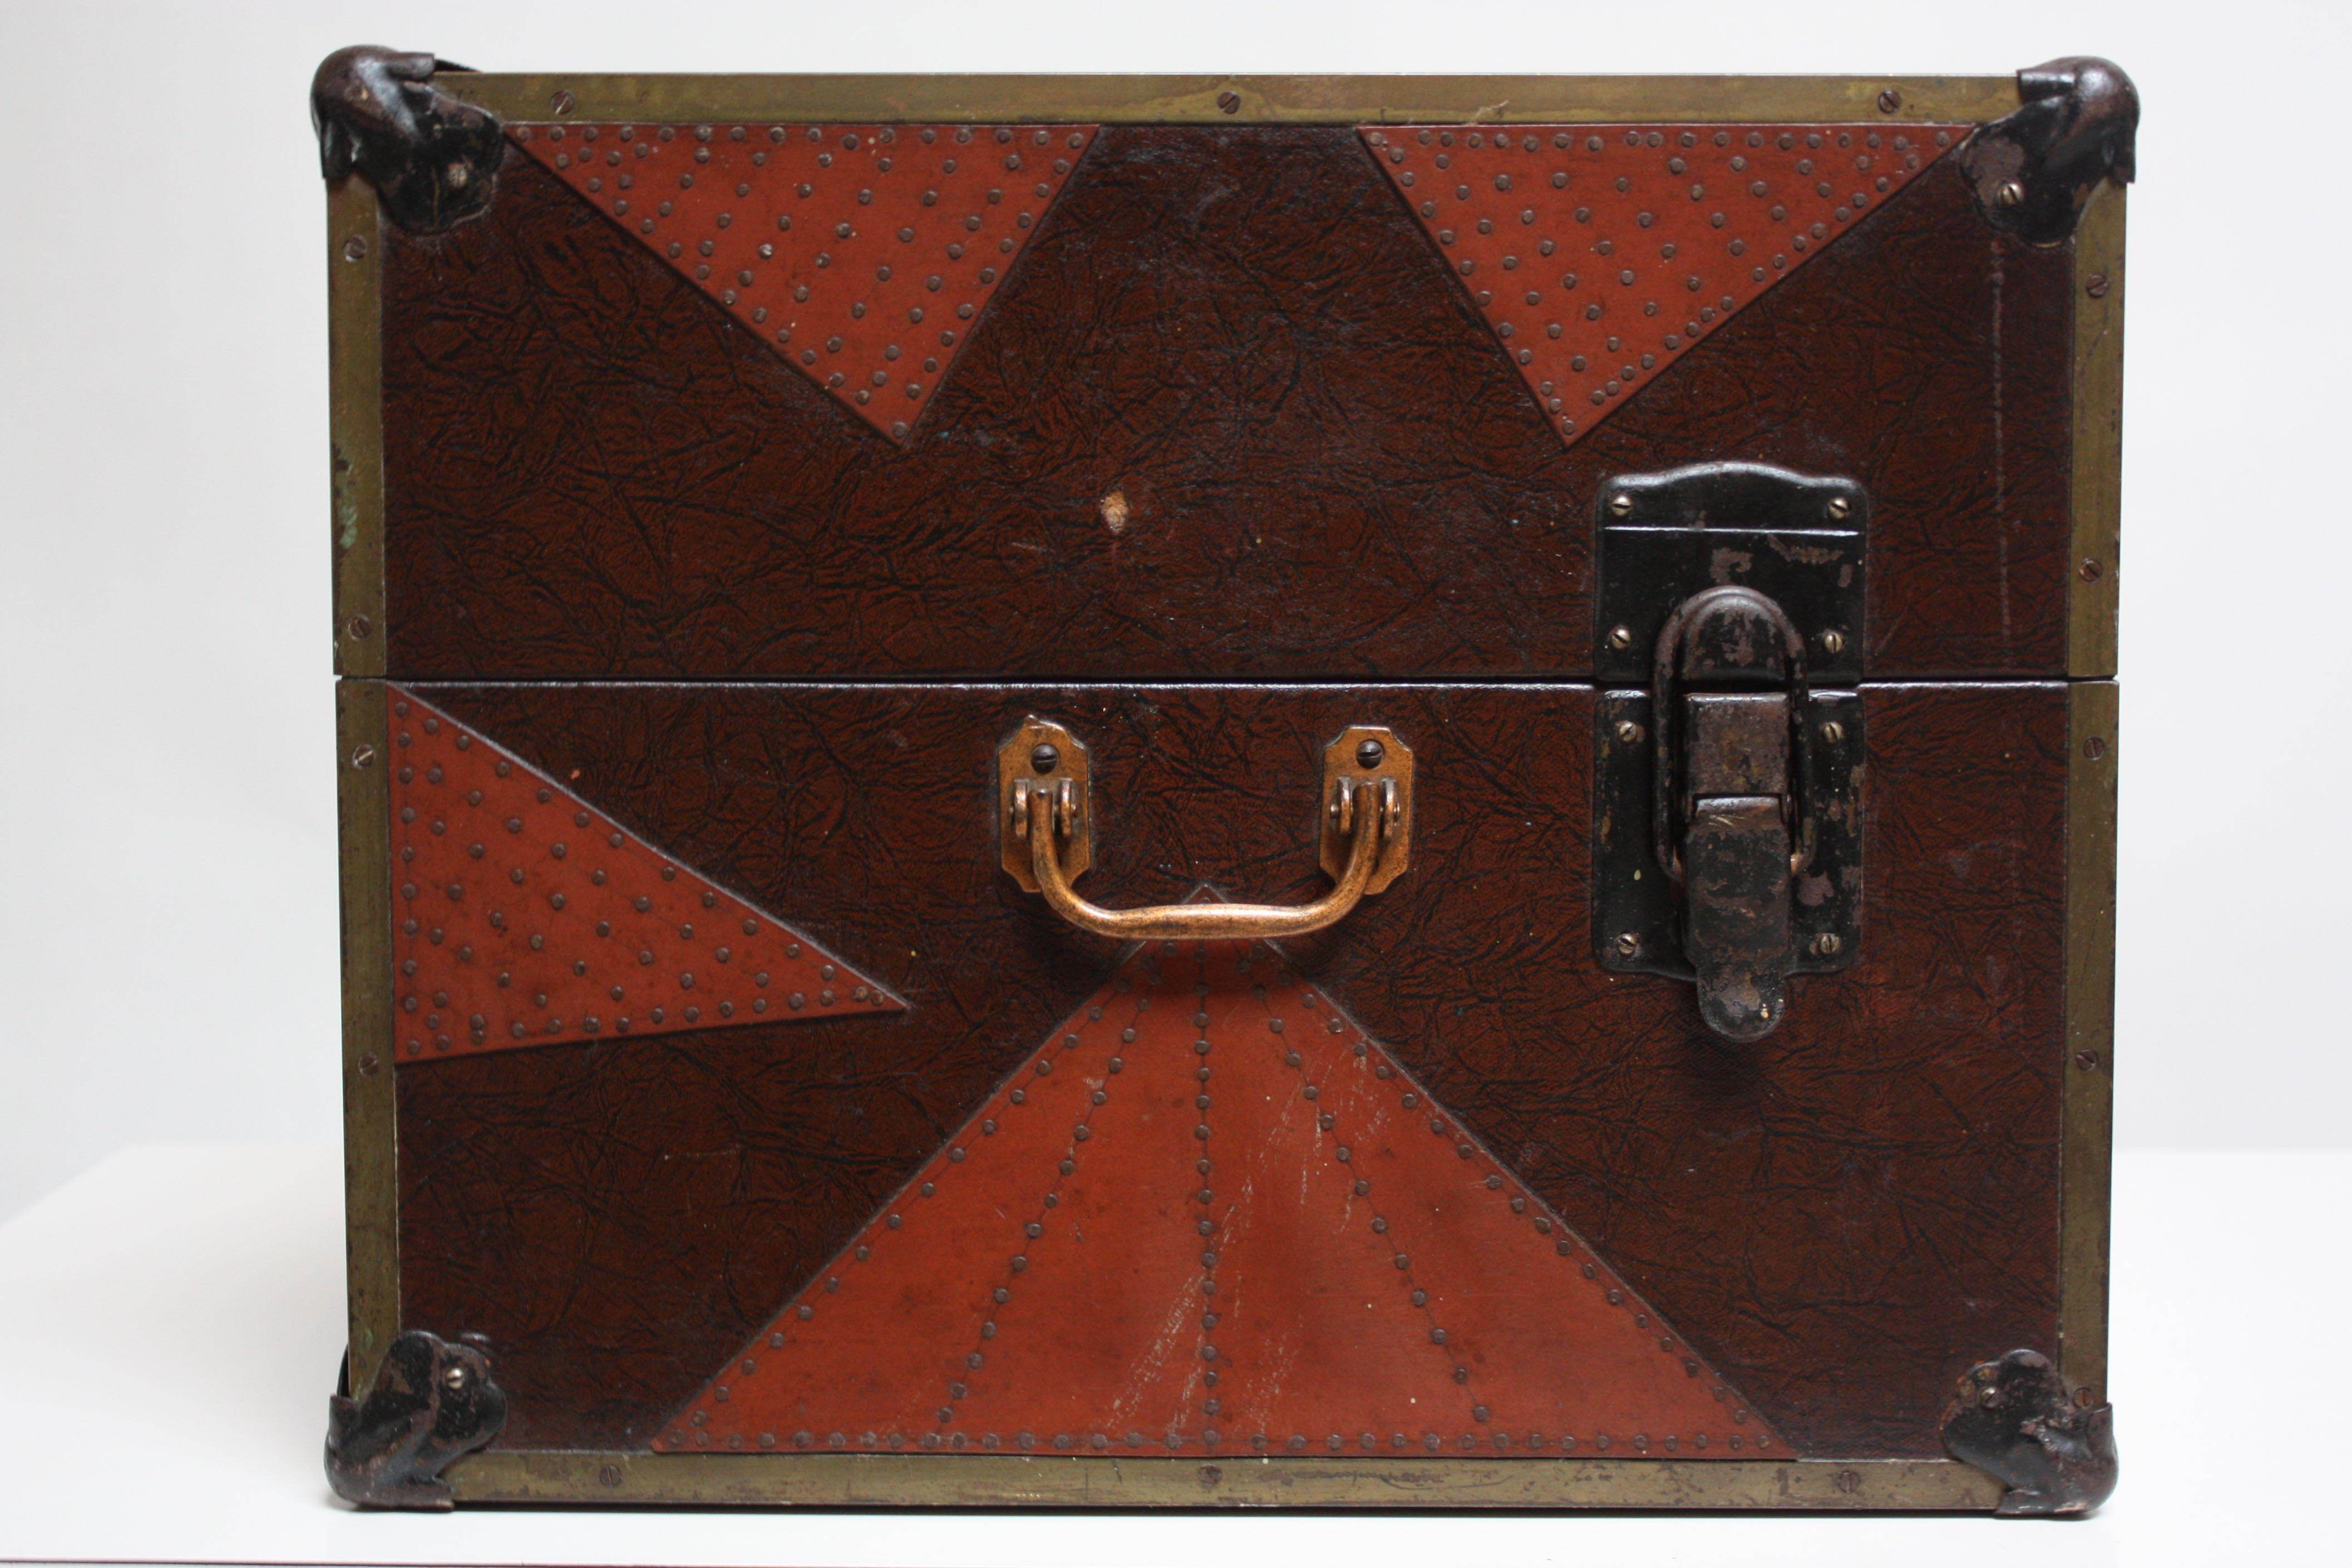 Folk Art metal box with hand-hammered and applied red and black cut-out decoration secured by nailhead trim. All mechanisms are intact, and box opens easily by releasing three latches. Part of the interior lining is missing and one piece is